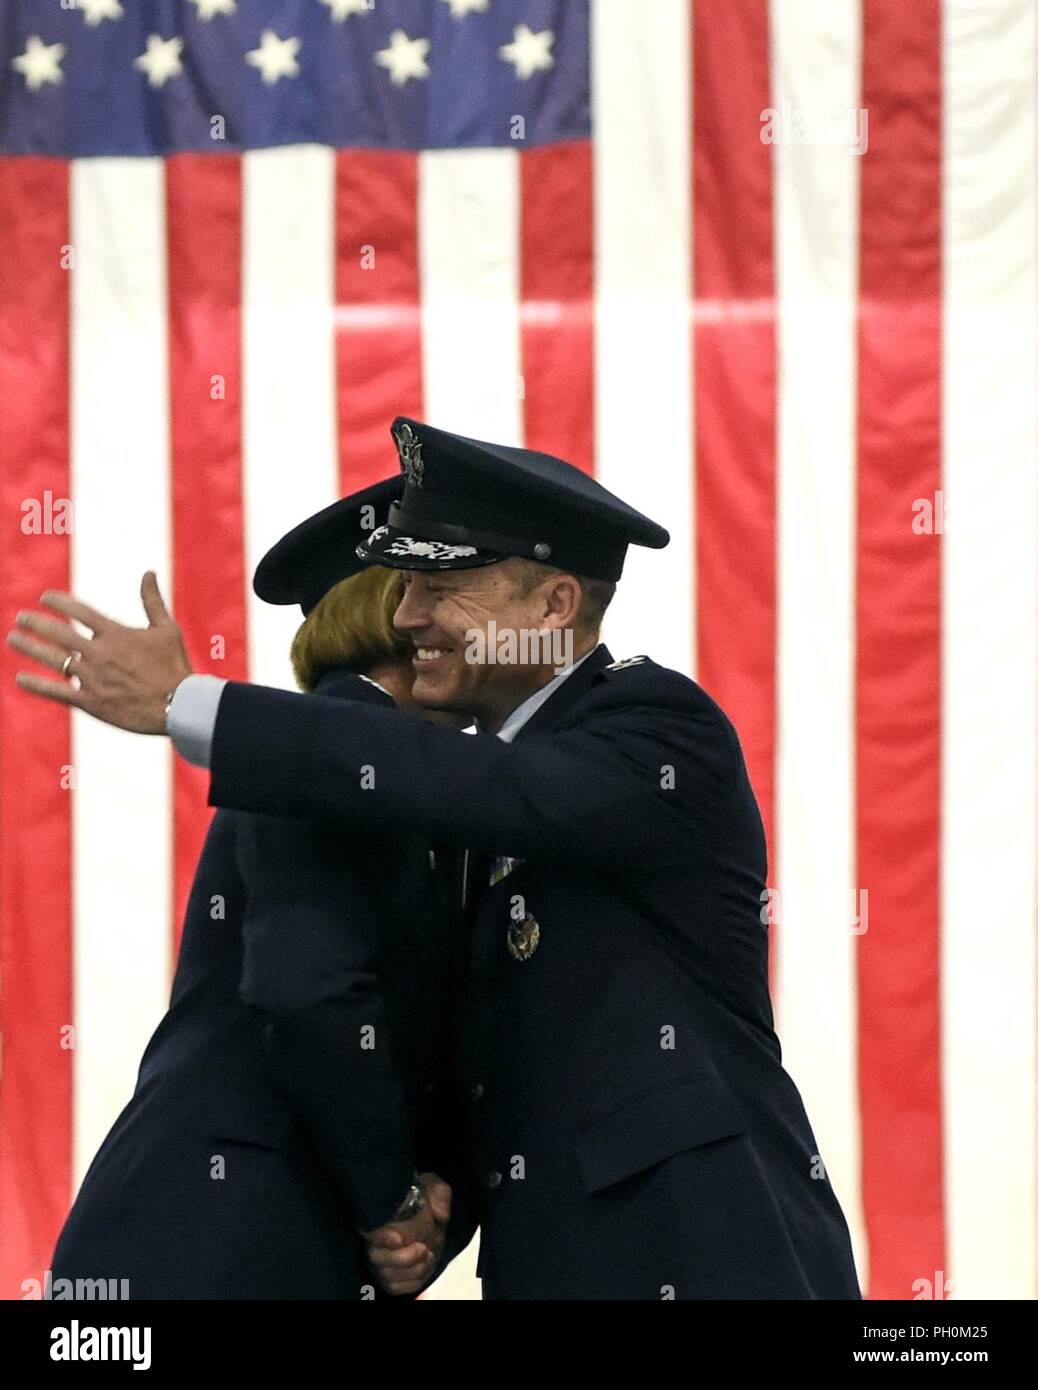 Col. Rebecca Sonkiss, 89th Airlift Wing commander is congratulated by Col Casey Eaton, former 89th AW commander, June 15, 2018 during a change of command ceremony at Joint Base Andrews, Md. Sonkiss assumed command of the 89th AW from Eaton. Sonkiss is a command pilot with more than 4,200 hours in the T-37B, T-44, EC-130/H, RQ-1A/B, C-130J and C-17 aircraft. She has 24 years of active-duty service and arrived at JBA from Joint Base Lewis-McCord, Wash. where she was the 62nd Airlift Wing commander. Stock Photo